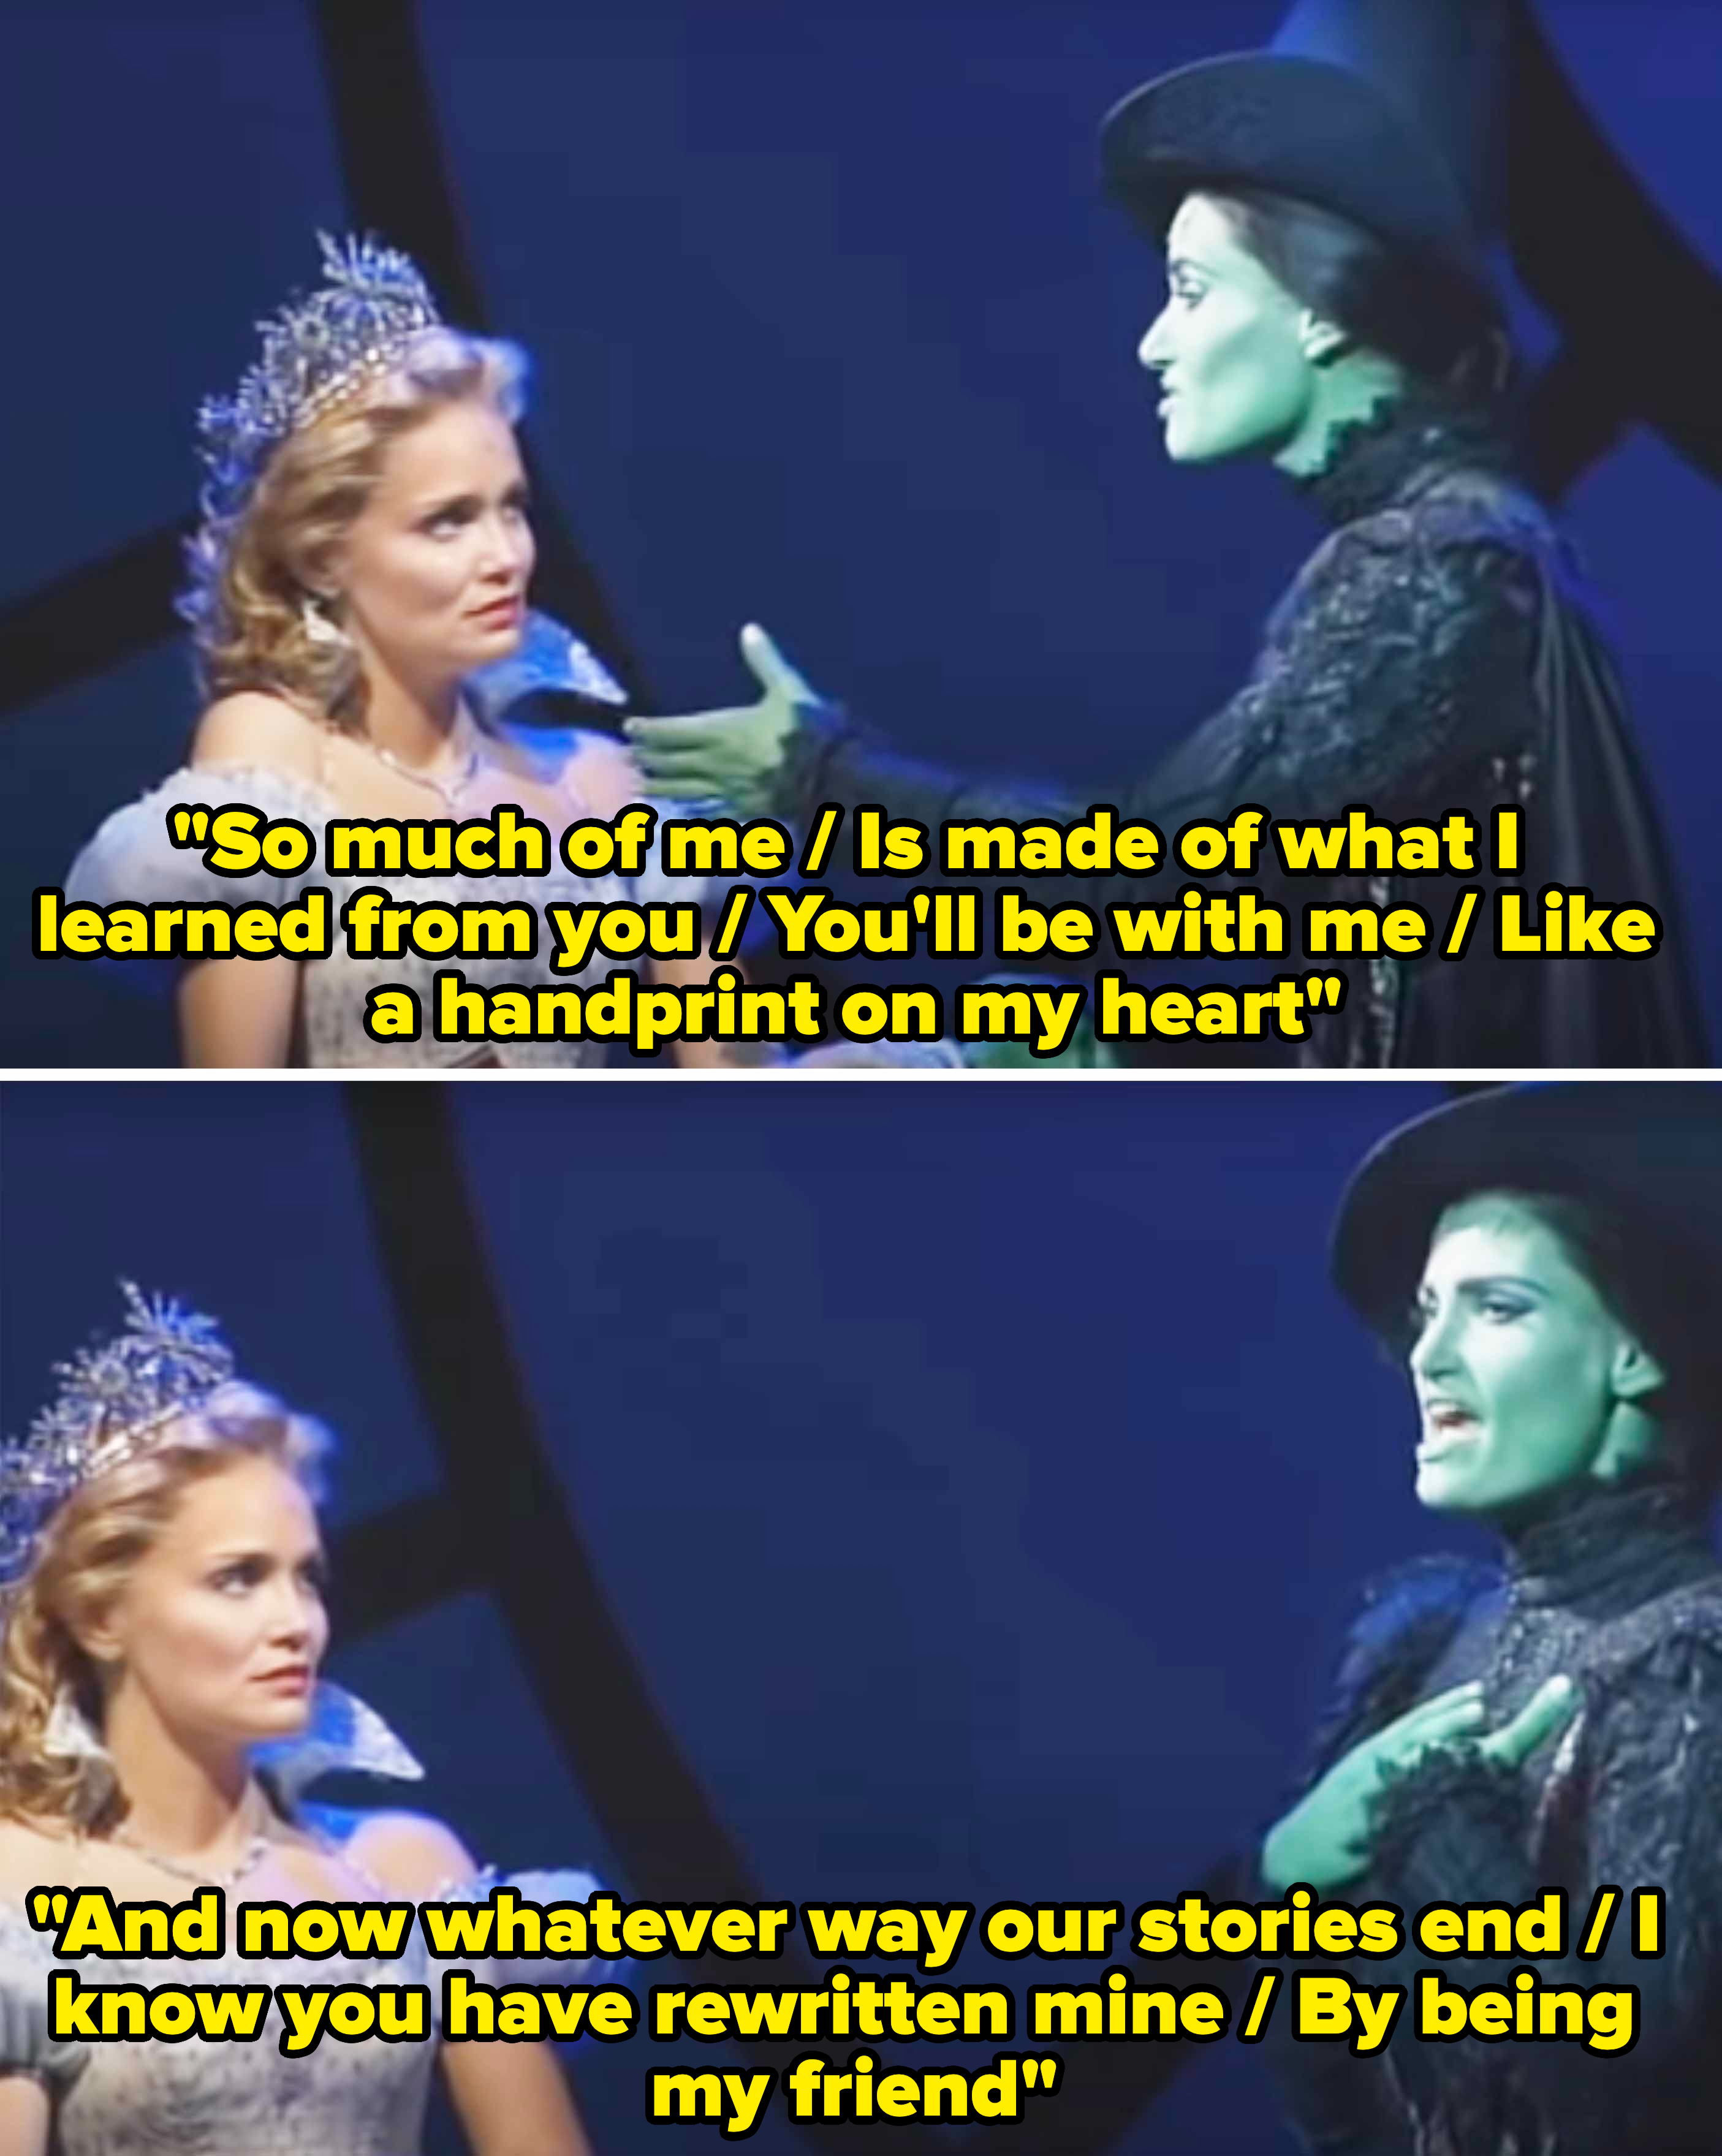 Glinda and Elphaba singing the song, including the lyrics &quot;So much of me is made of what I learned from you; you&#x27;ll be with me, like a handprint on my heart&quot; and &quot;And now whatever way our stories end I know you have rewritten mine by being my friend&quot;